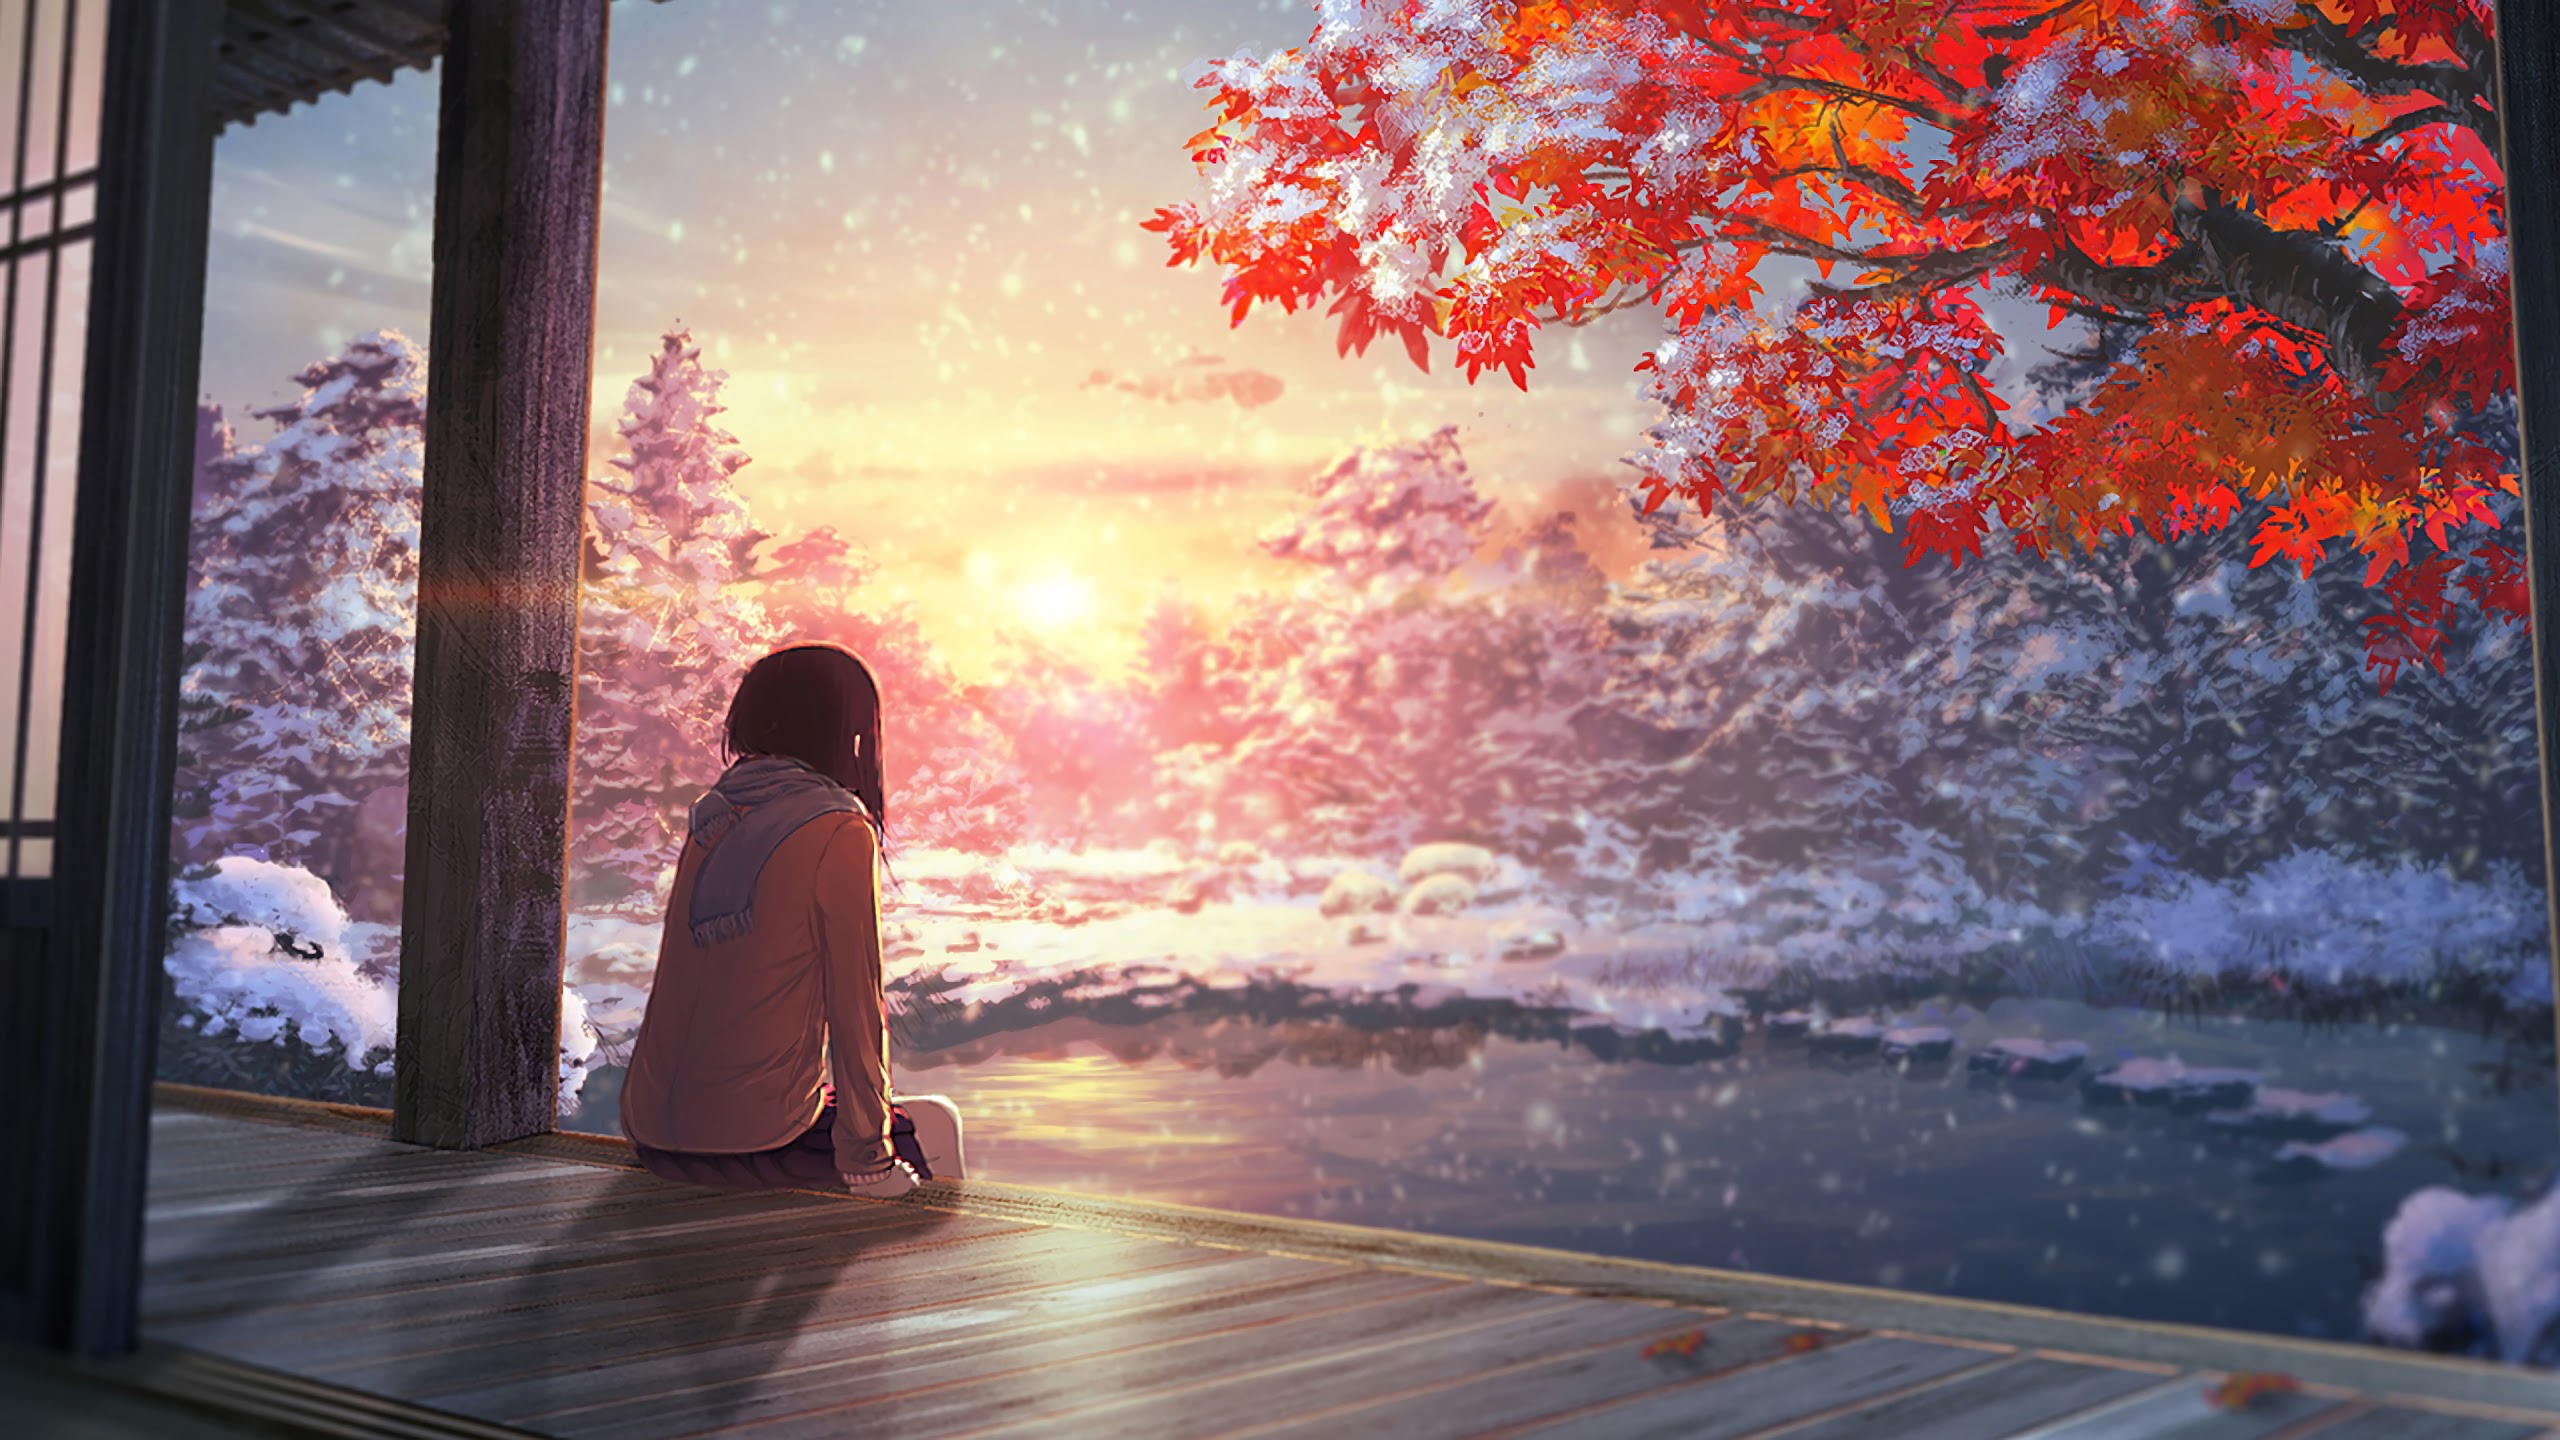 Anime Winter Scenery Wallpapers.